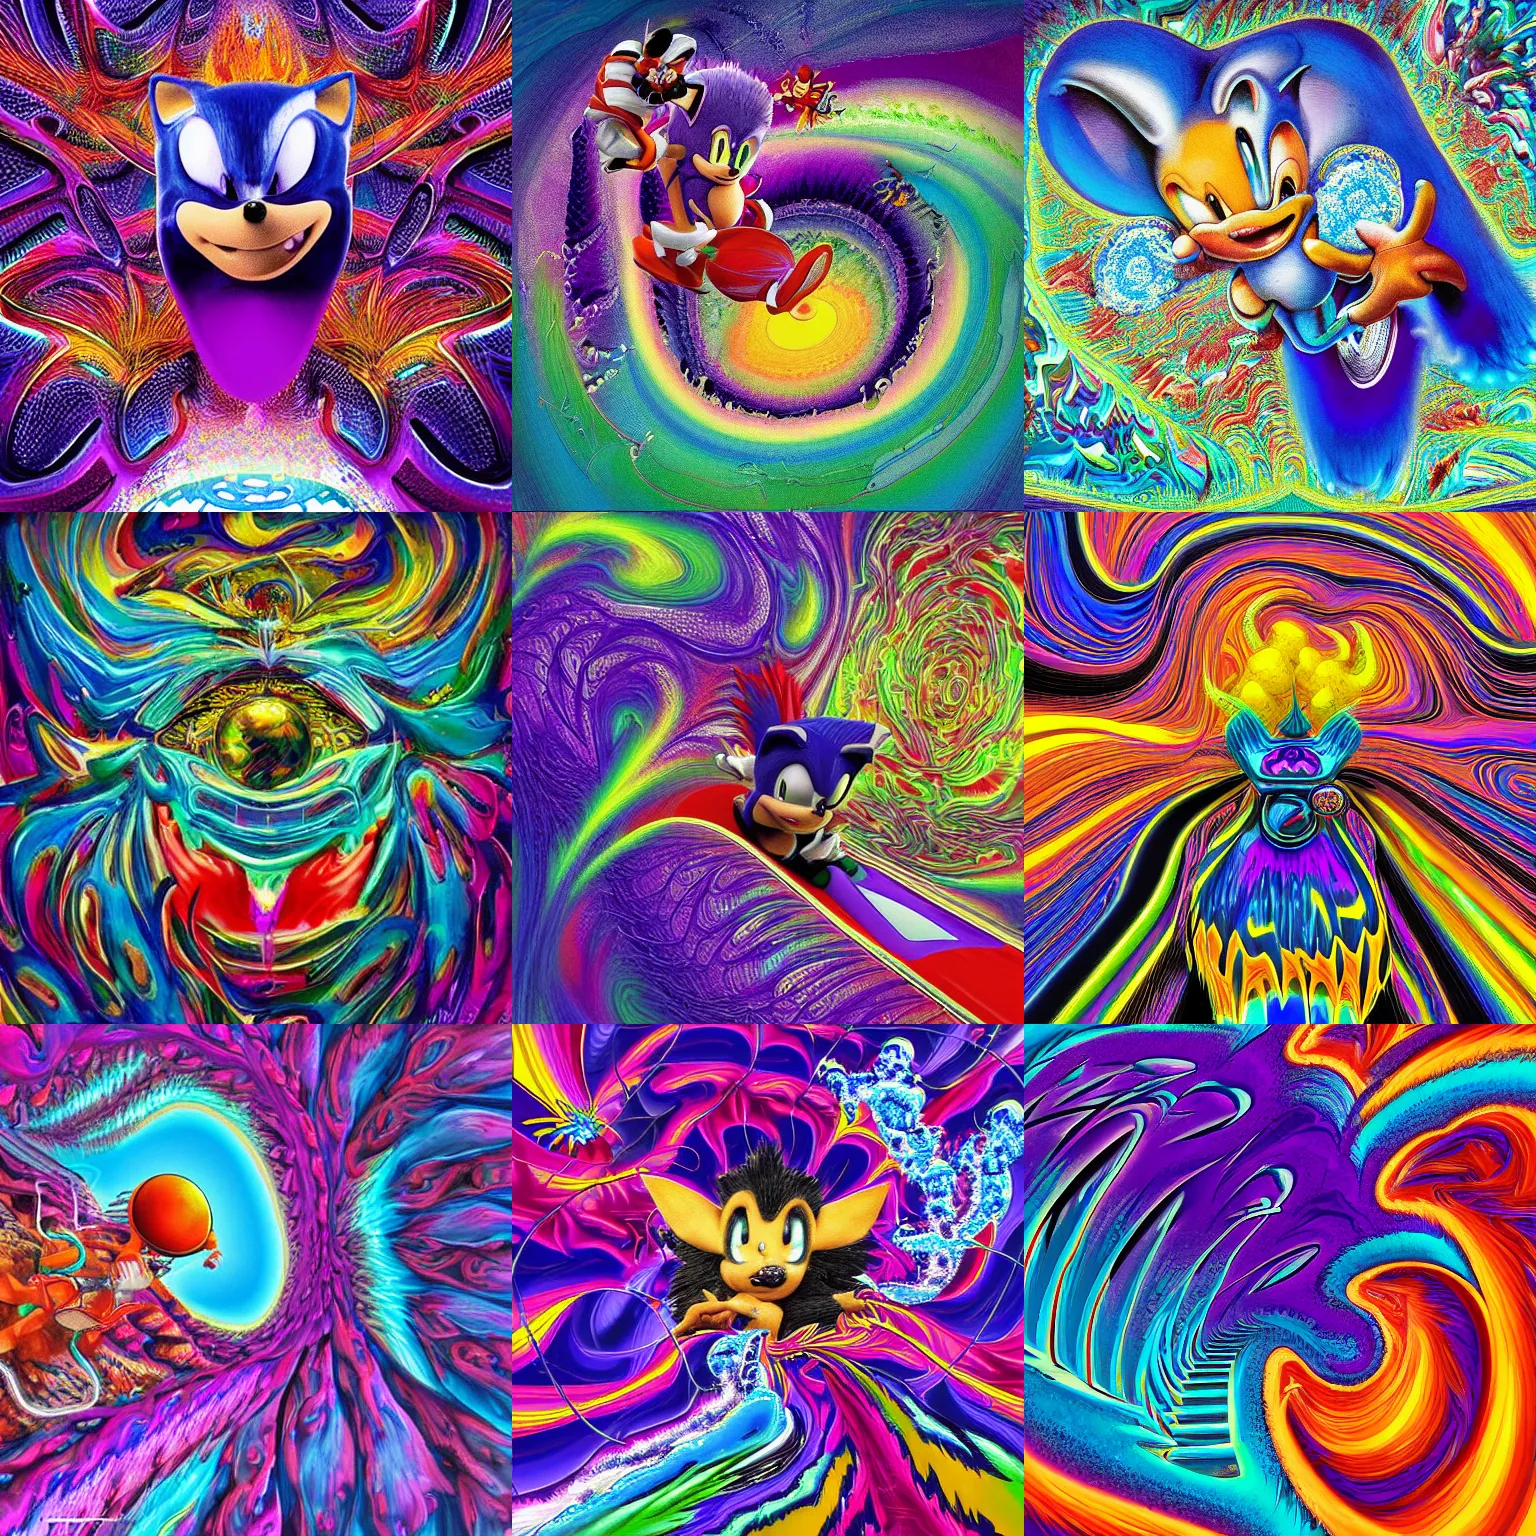 Prompt: surreal, fractal, detailed professional, high quality portrait sonic airbrush art MGMT album cover portrait of a liquid dissolving LSD DMT sonic the hedgehog surfing through cyberspace, purple checkerboard background, 1990s 1992 Sega Genesis video game album cover